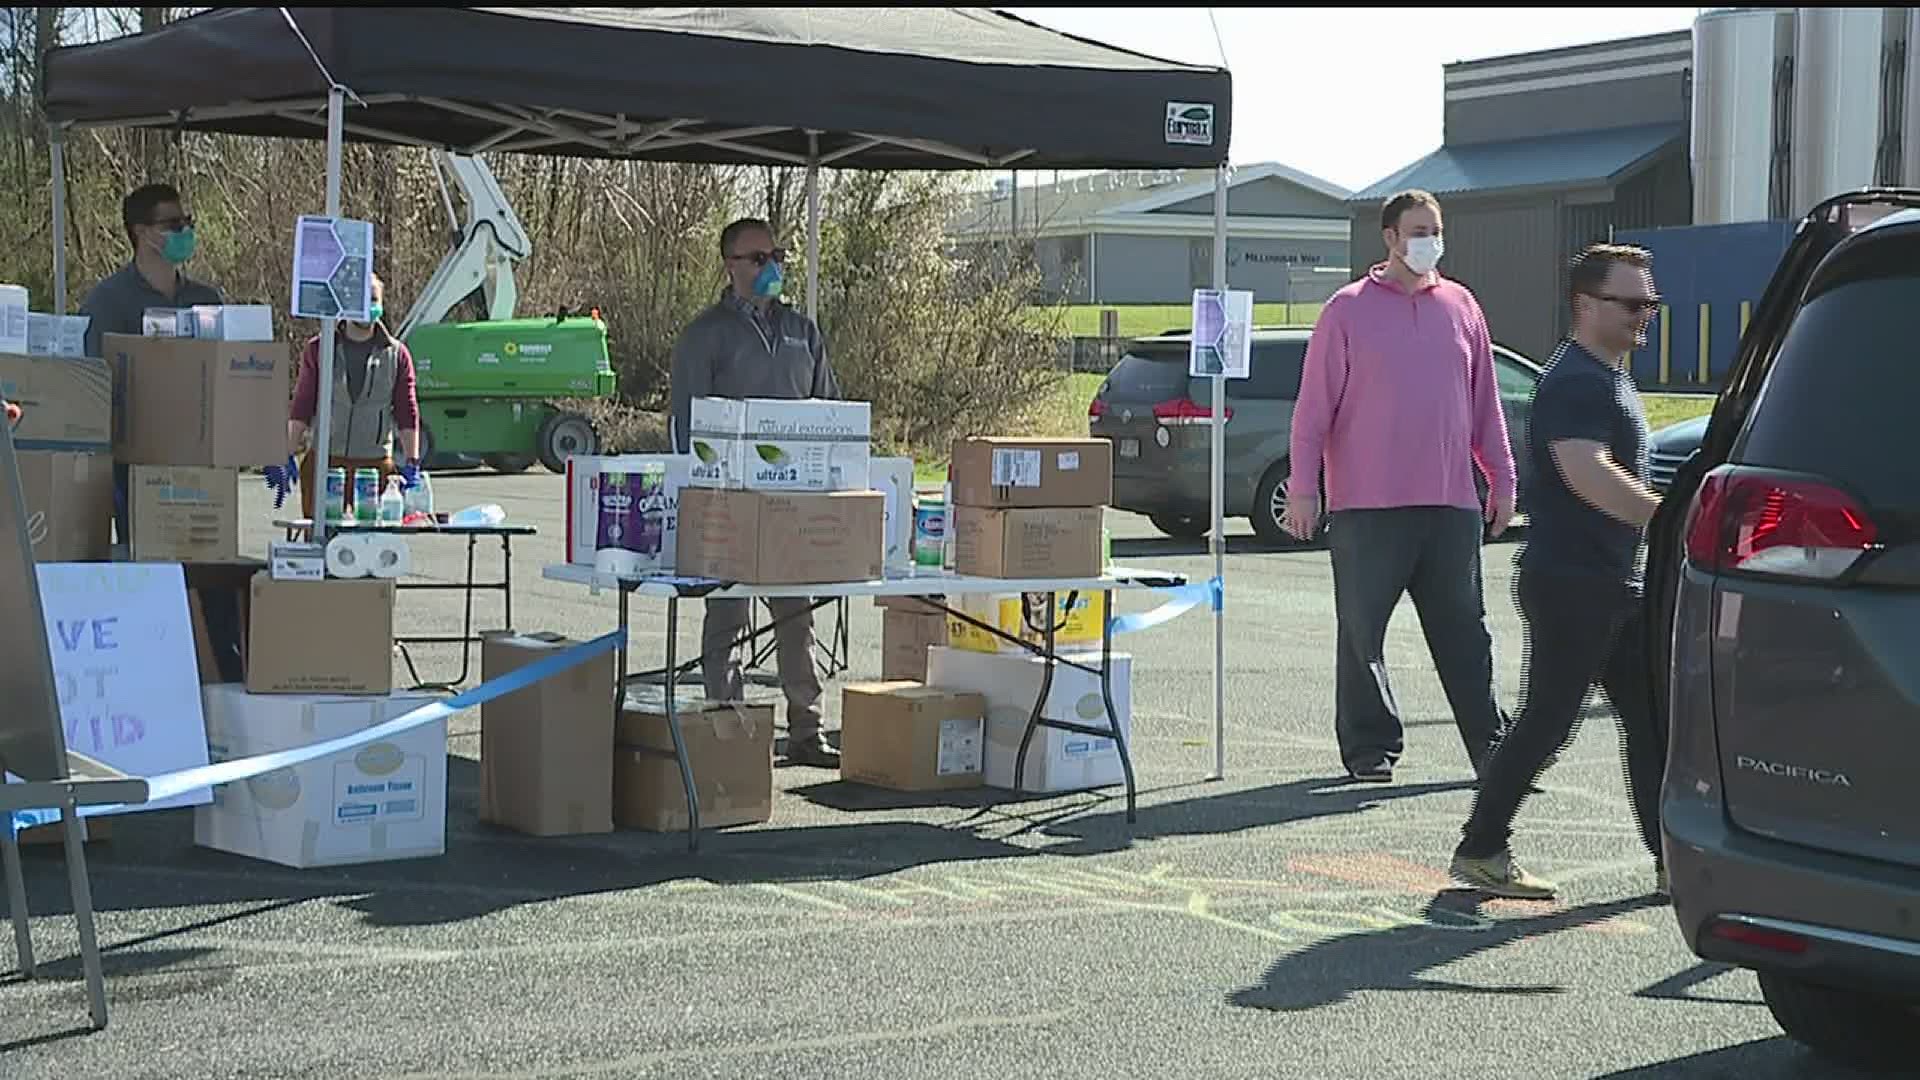 A group of local dentists teamed up to organize the donation drive to help first responders on the front lines of the COVID-19 crisis